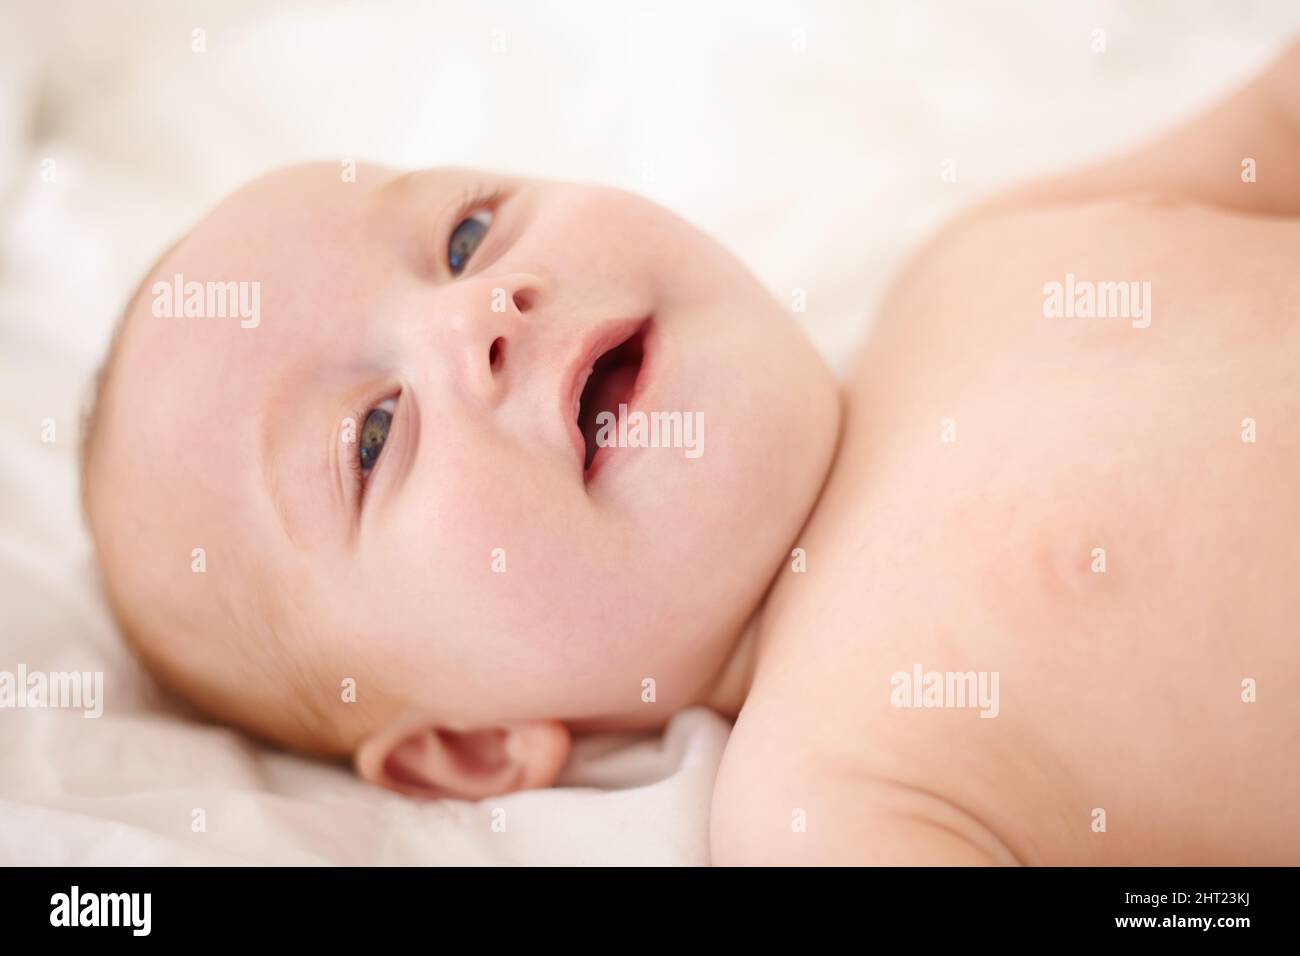 Pure sweetness. Sweet little baby smiling happily. Stock Photo